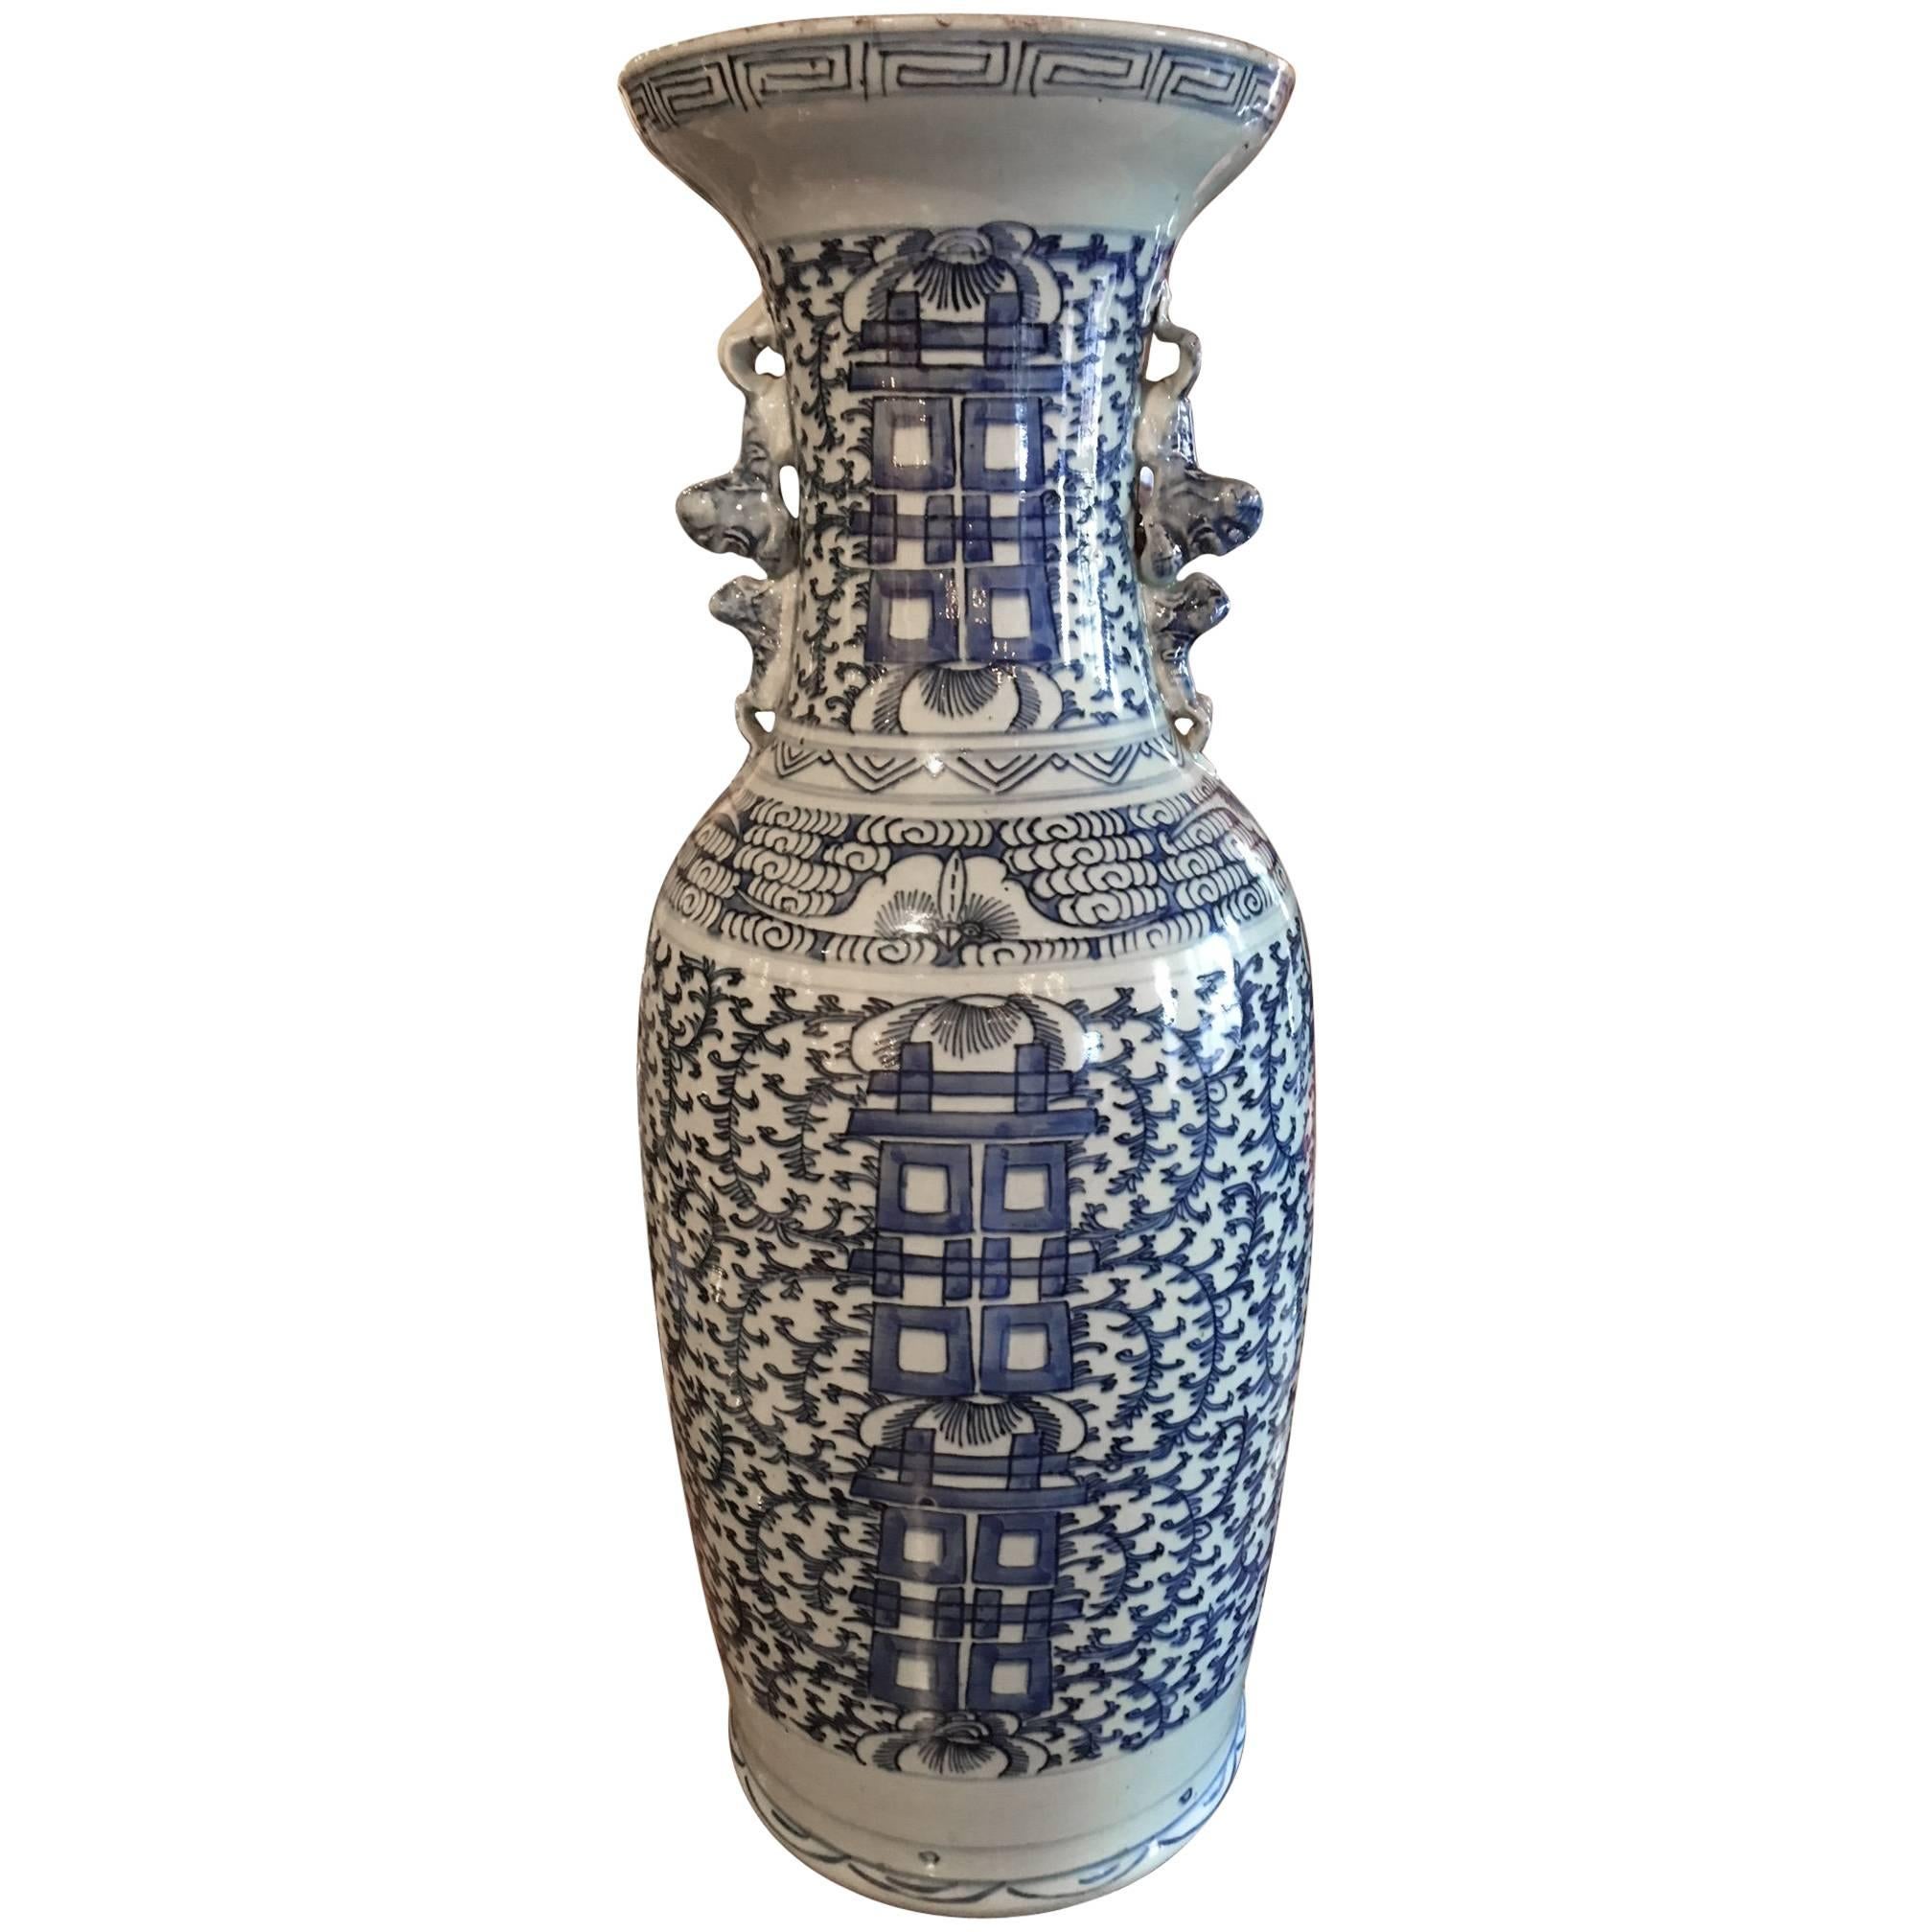 Blue and White Chinese Large Baluster Form Vase, Early 20th Century